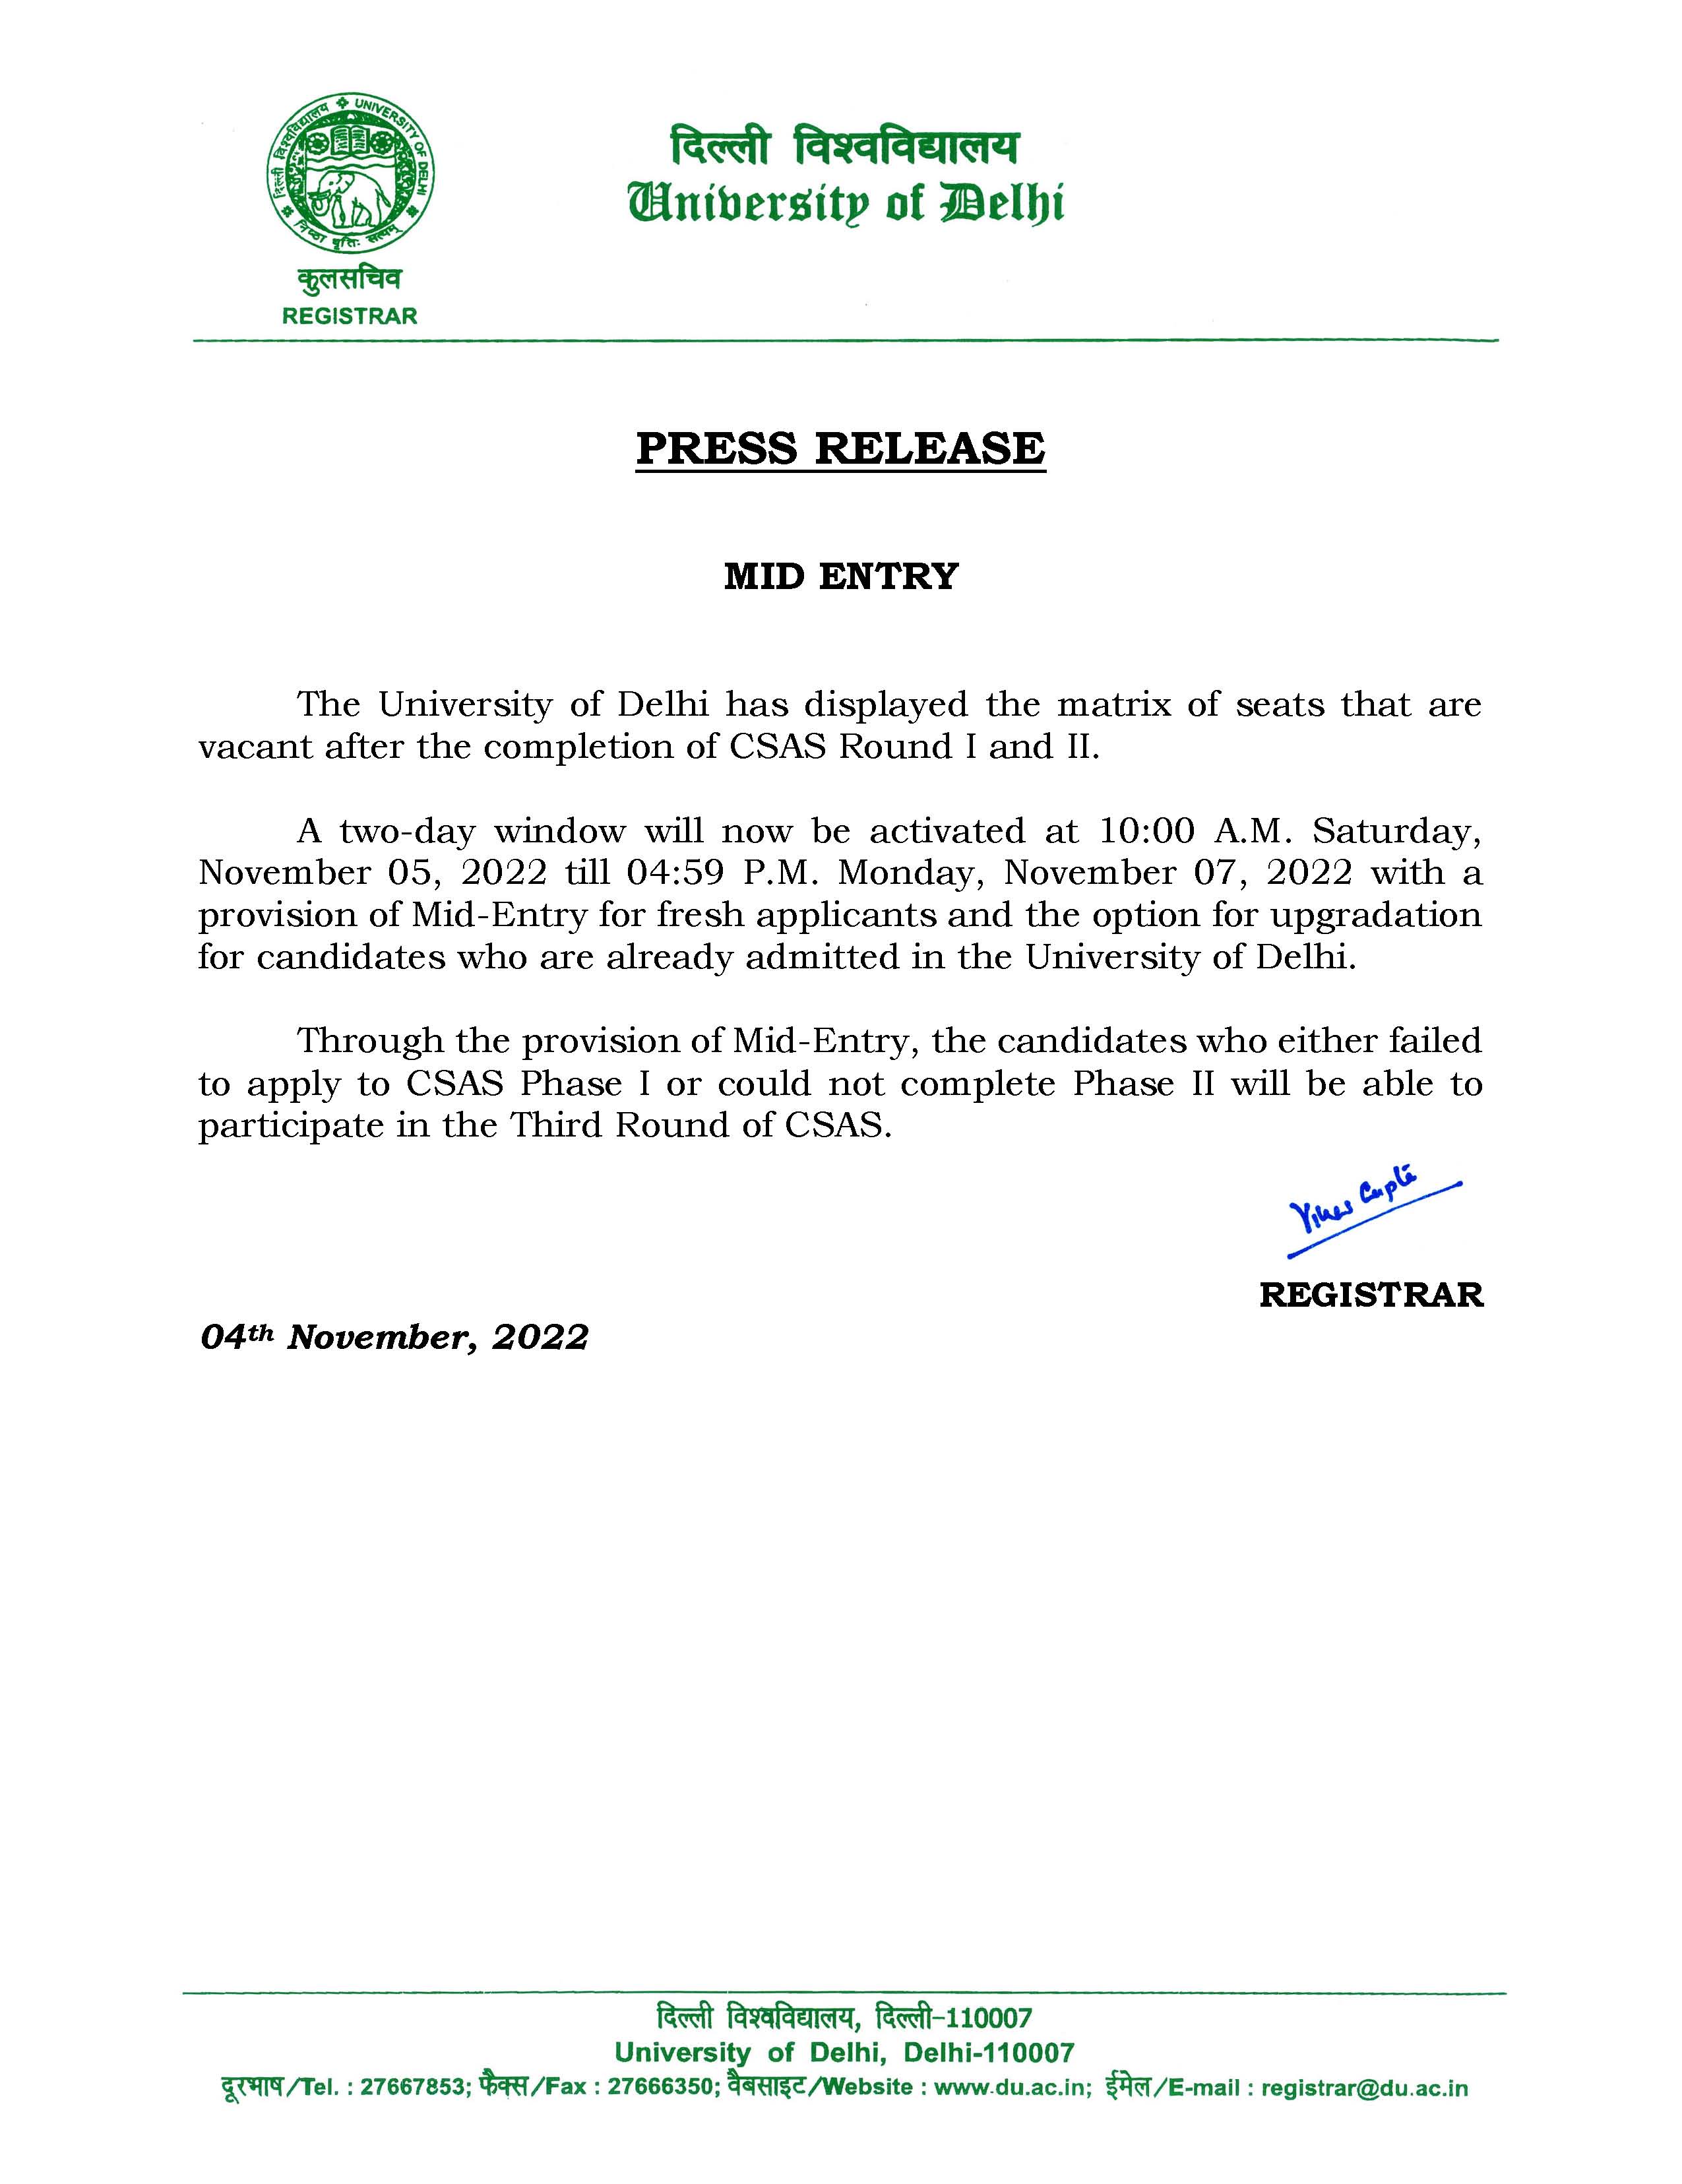 04-11-2022-Press Release - Provision for Mid Entry - CSAS 2022 - DU